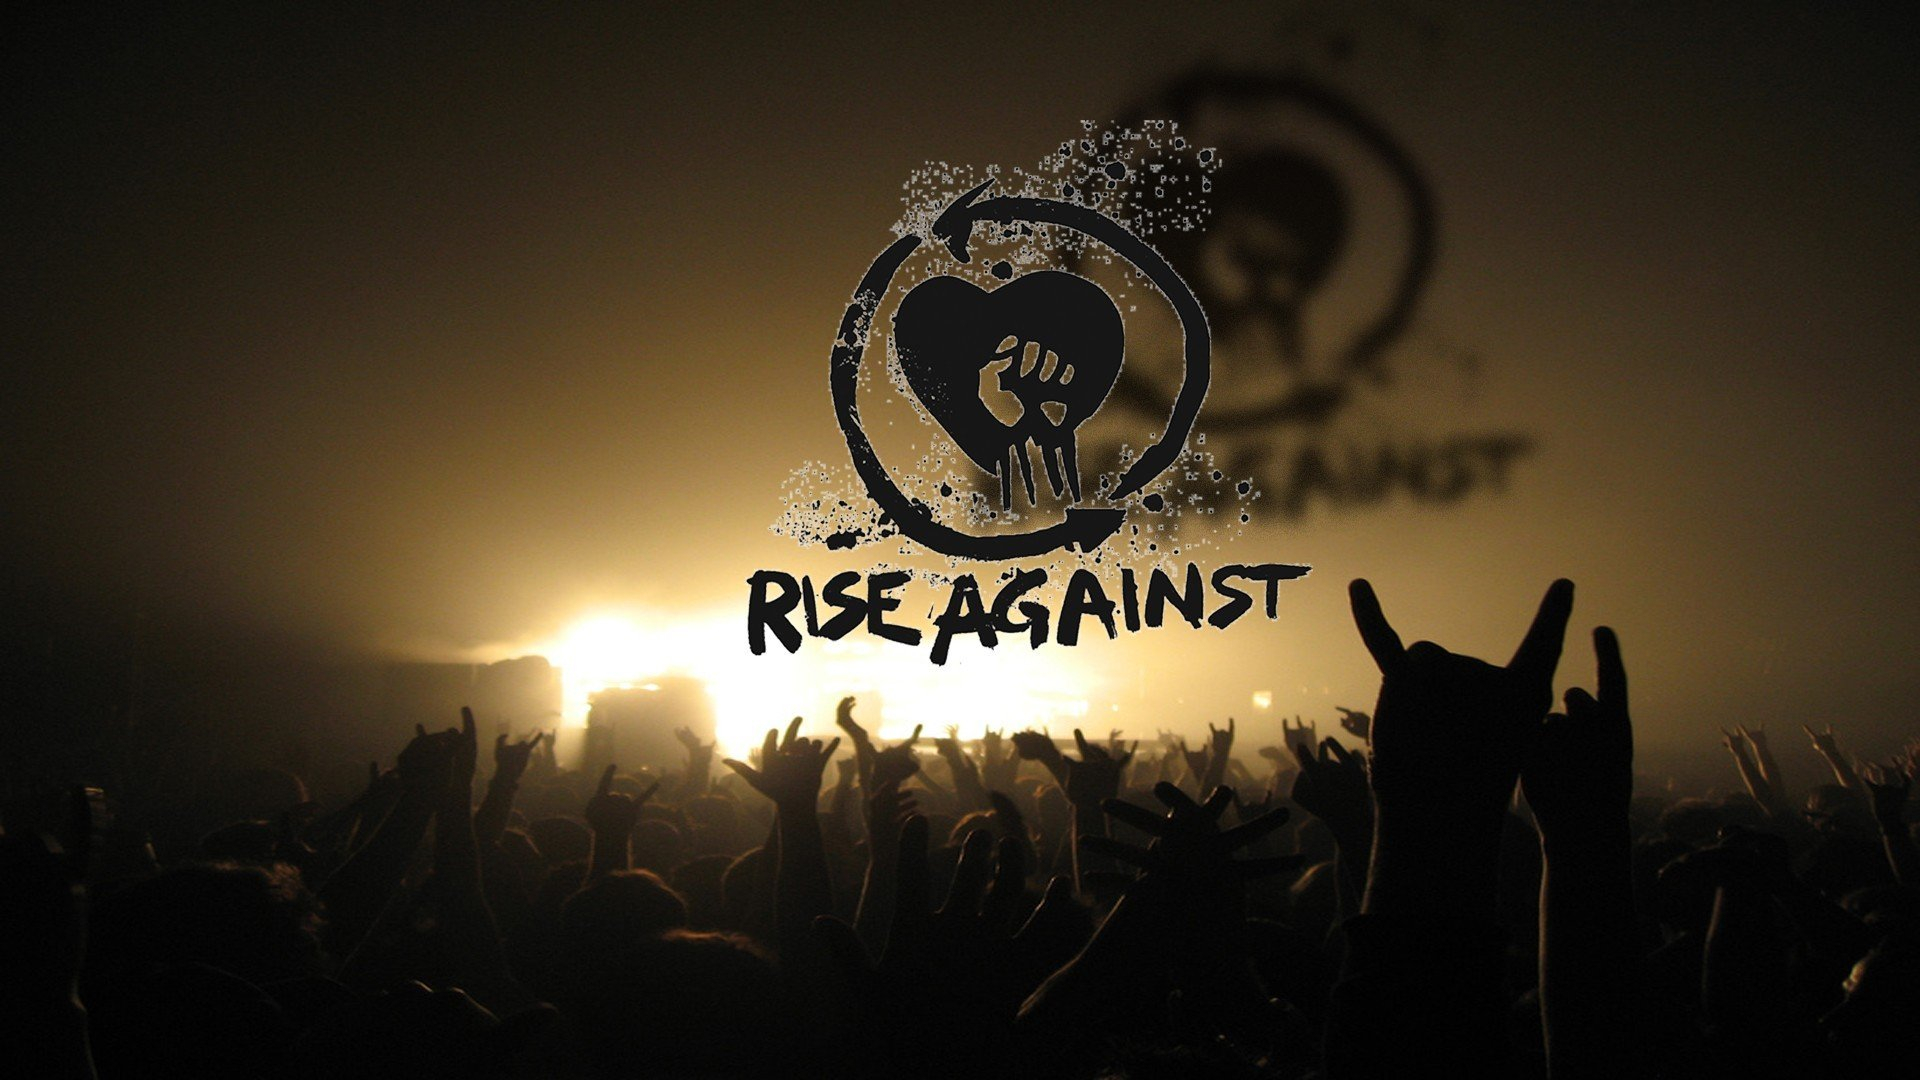 1920x1080 Wallpaper : px, music, punk rock, Rise Against CoolWallpapers 1195021 HD Wallpapers